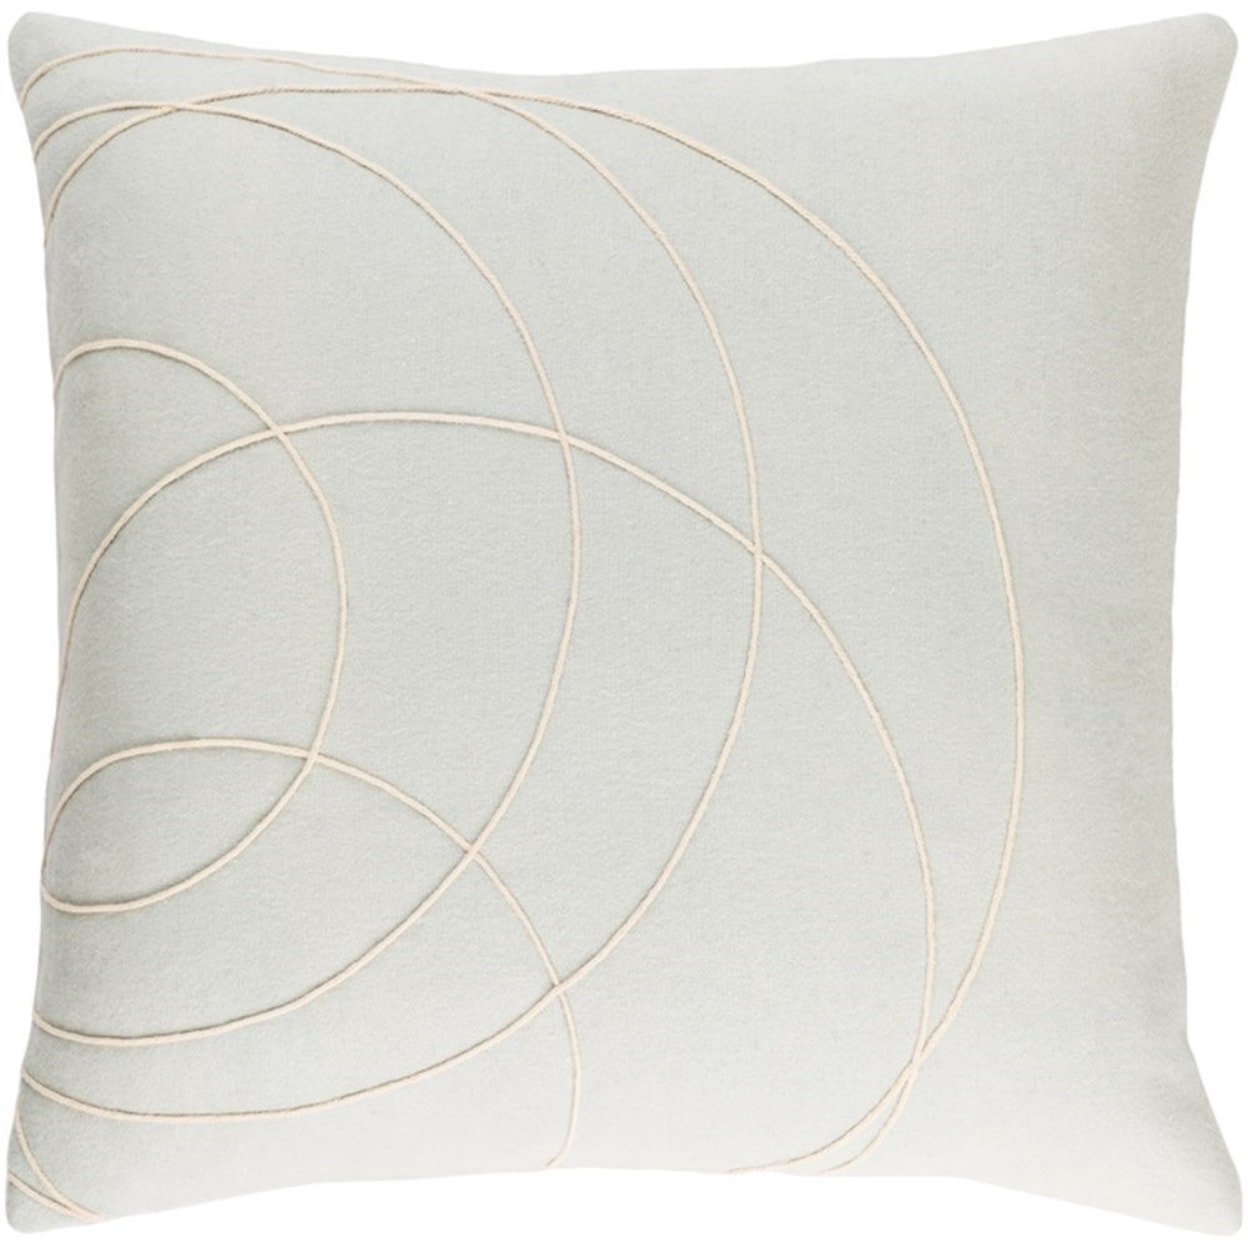 Surya Solid Bold Pillow